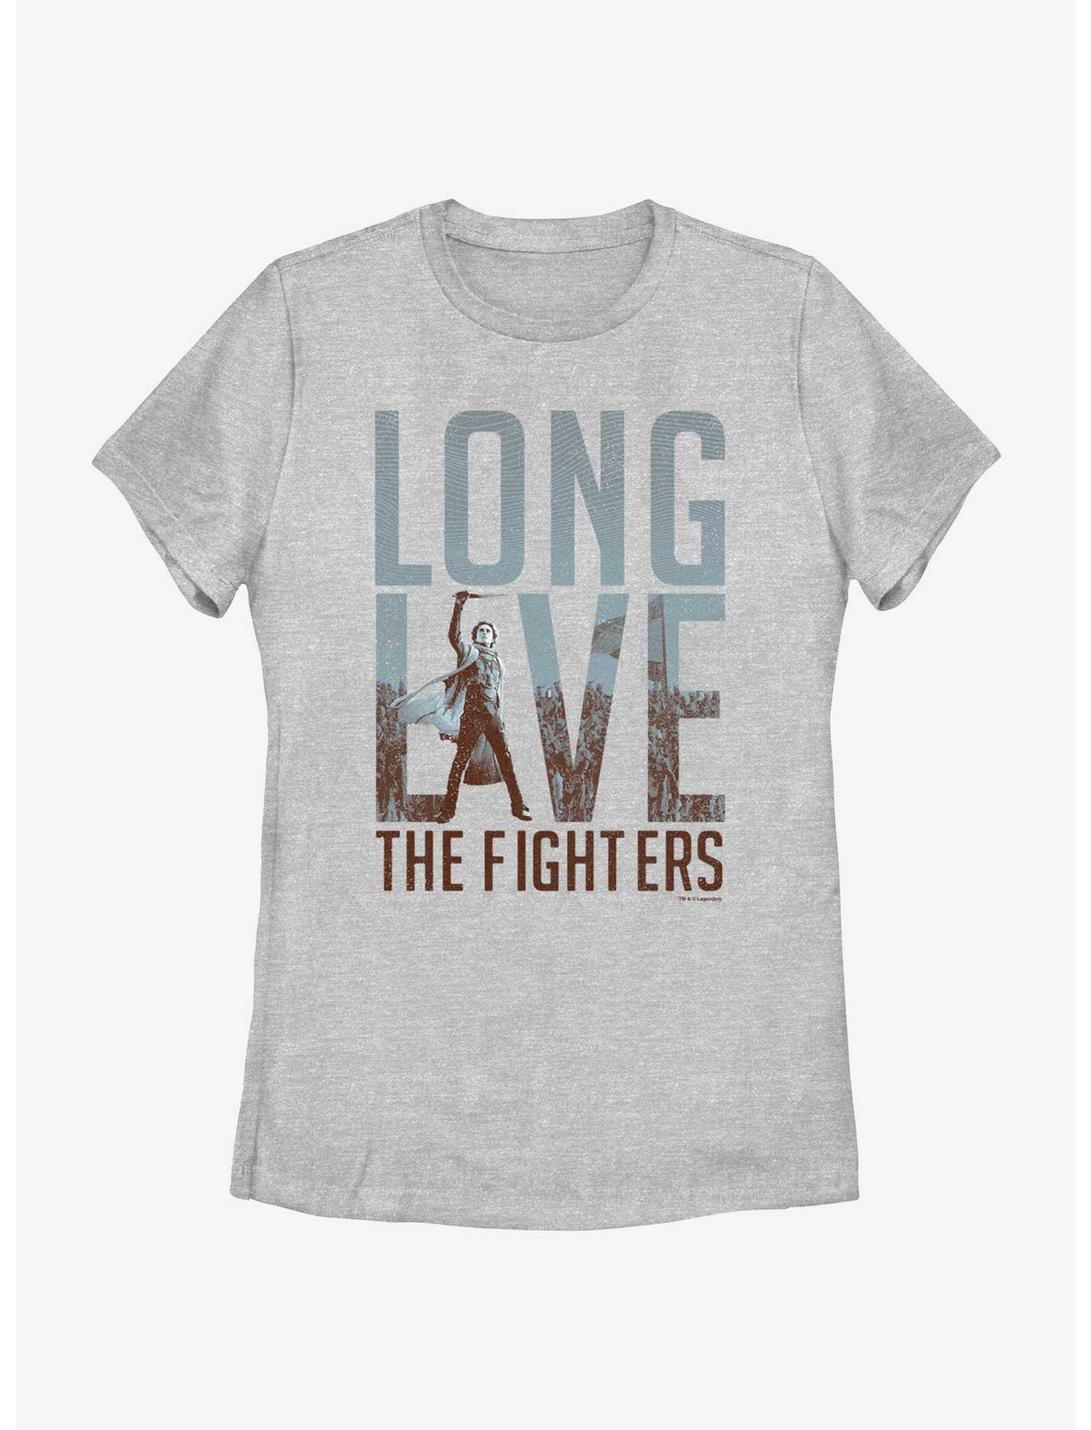 Dune Long Live The Fighters Paul Womens T-Shirt, ATH HTR, hi-res